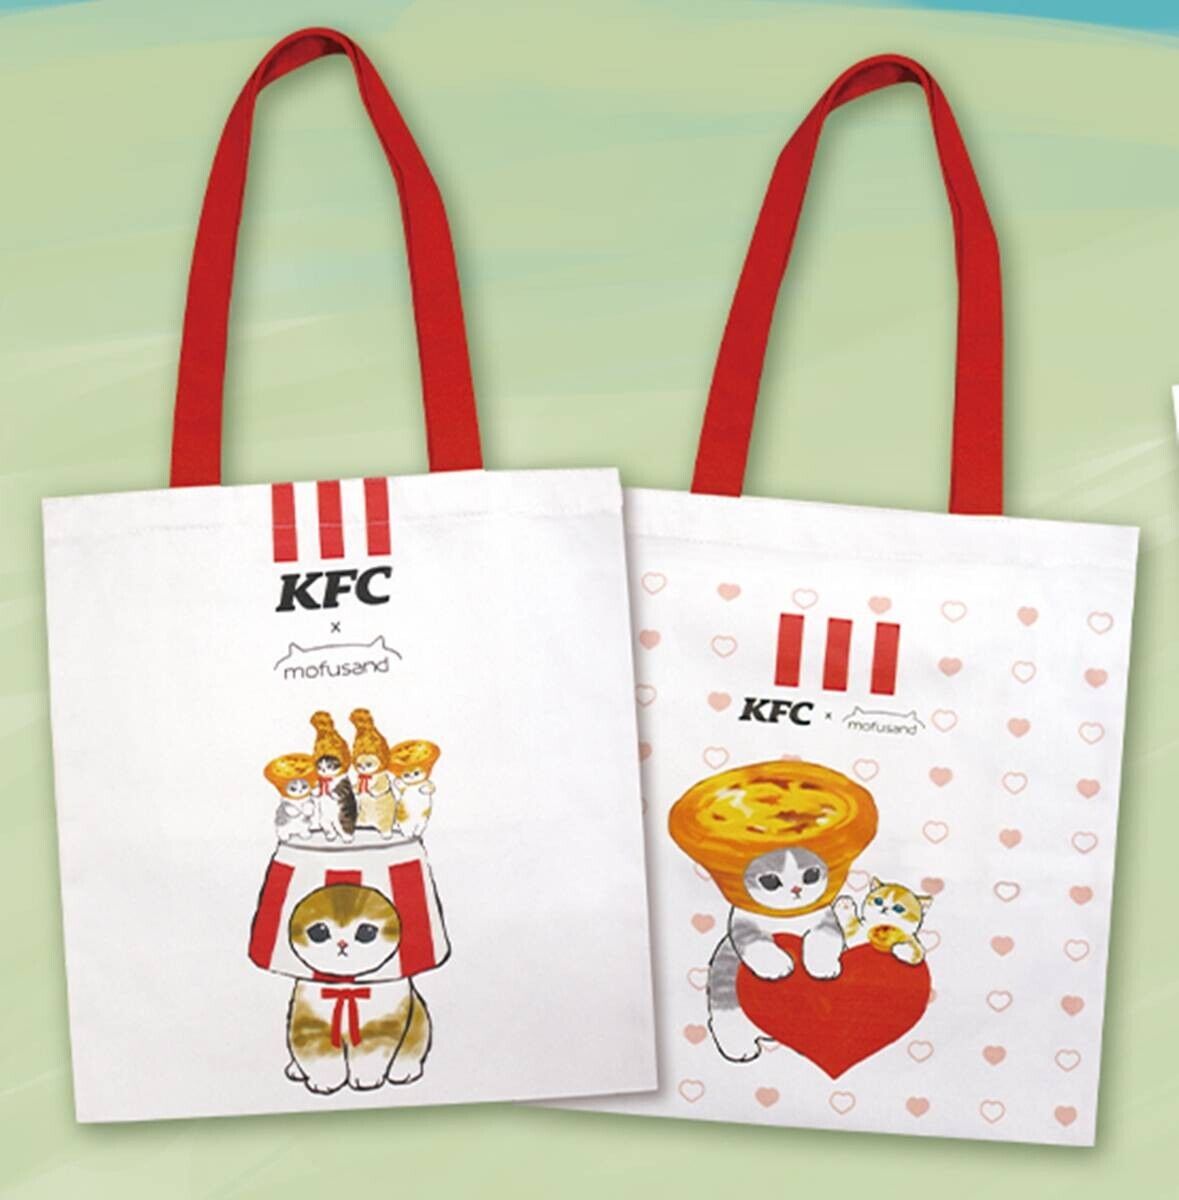 Mofusand X KFC Taiwan set of 2 limited edition canvas tote (official Merch)